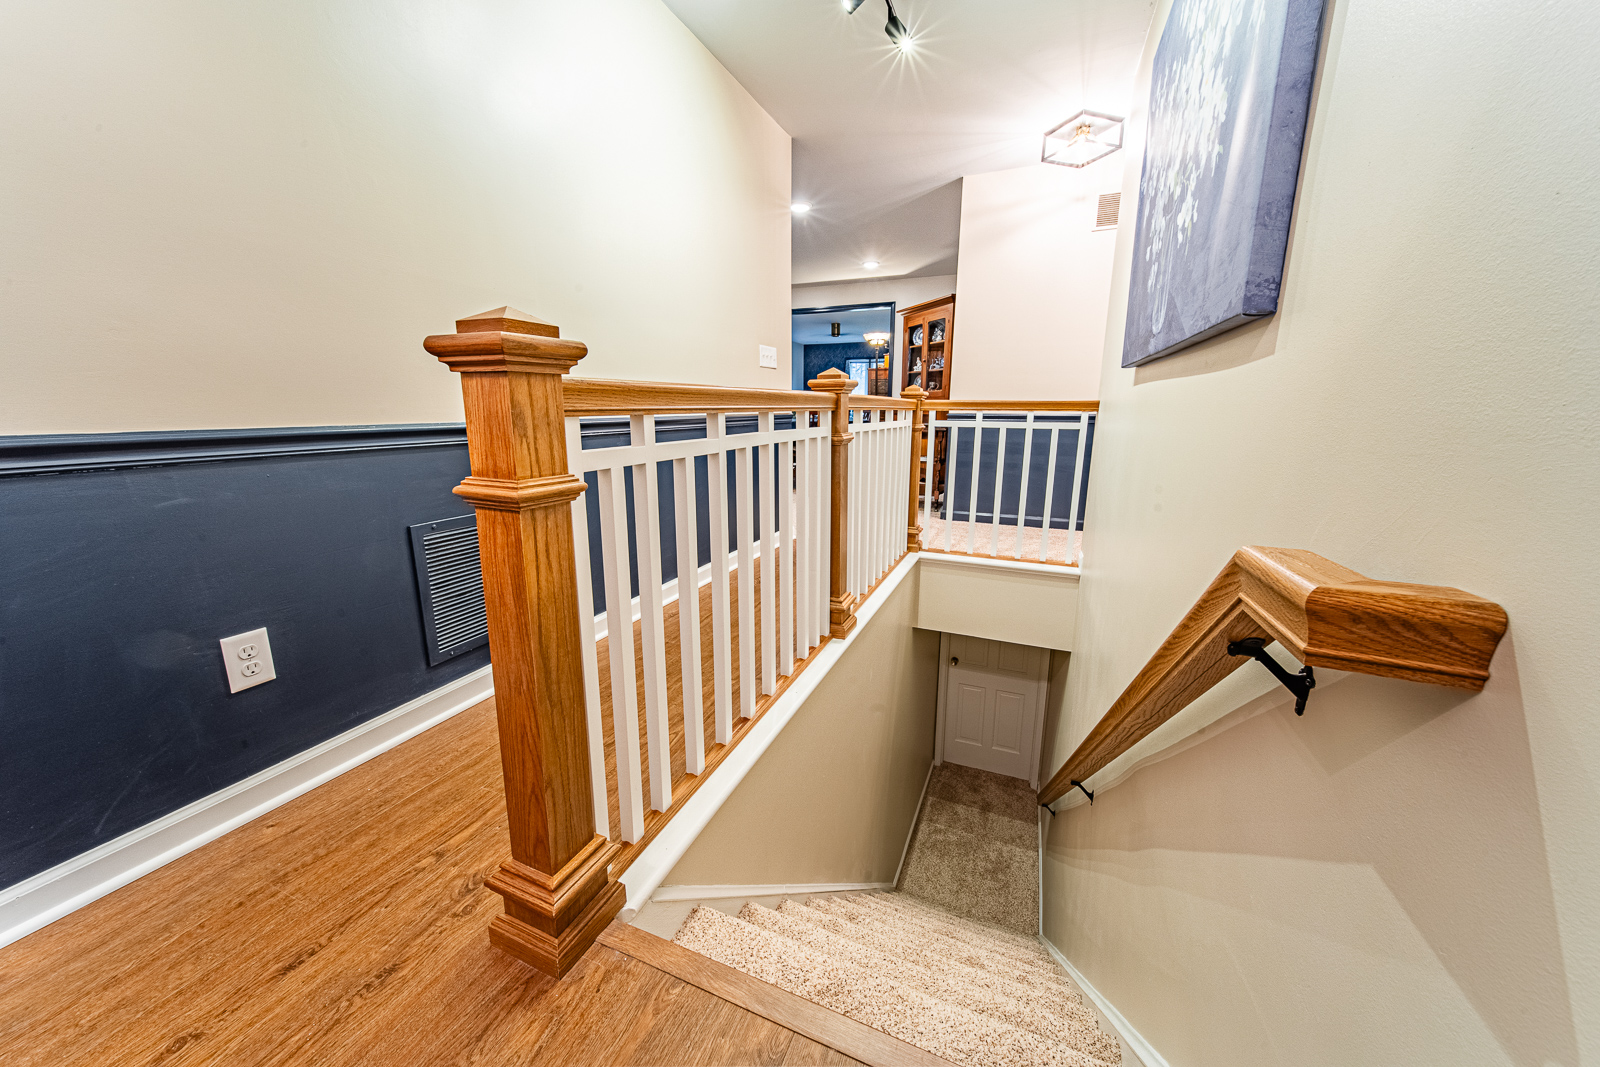 Newly installed staircase railing in Lafayette home, combining safety and style.